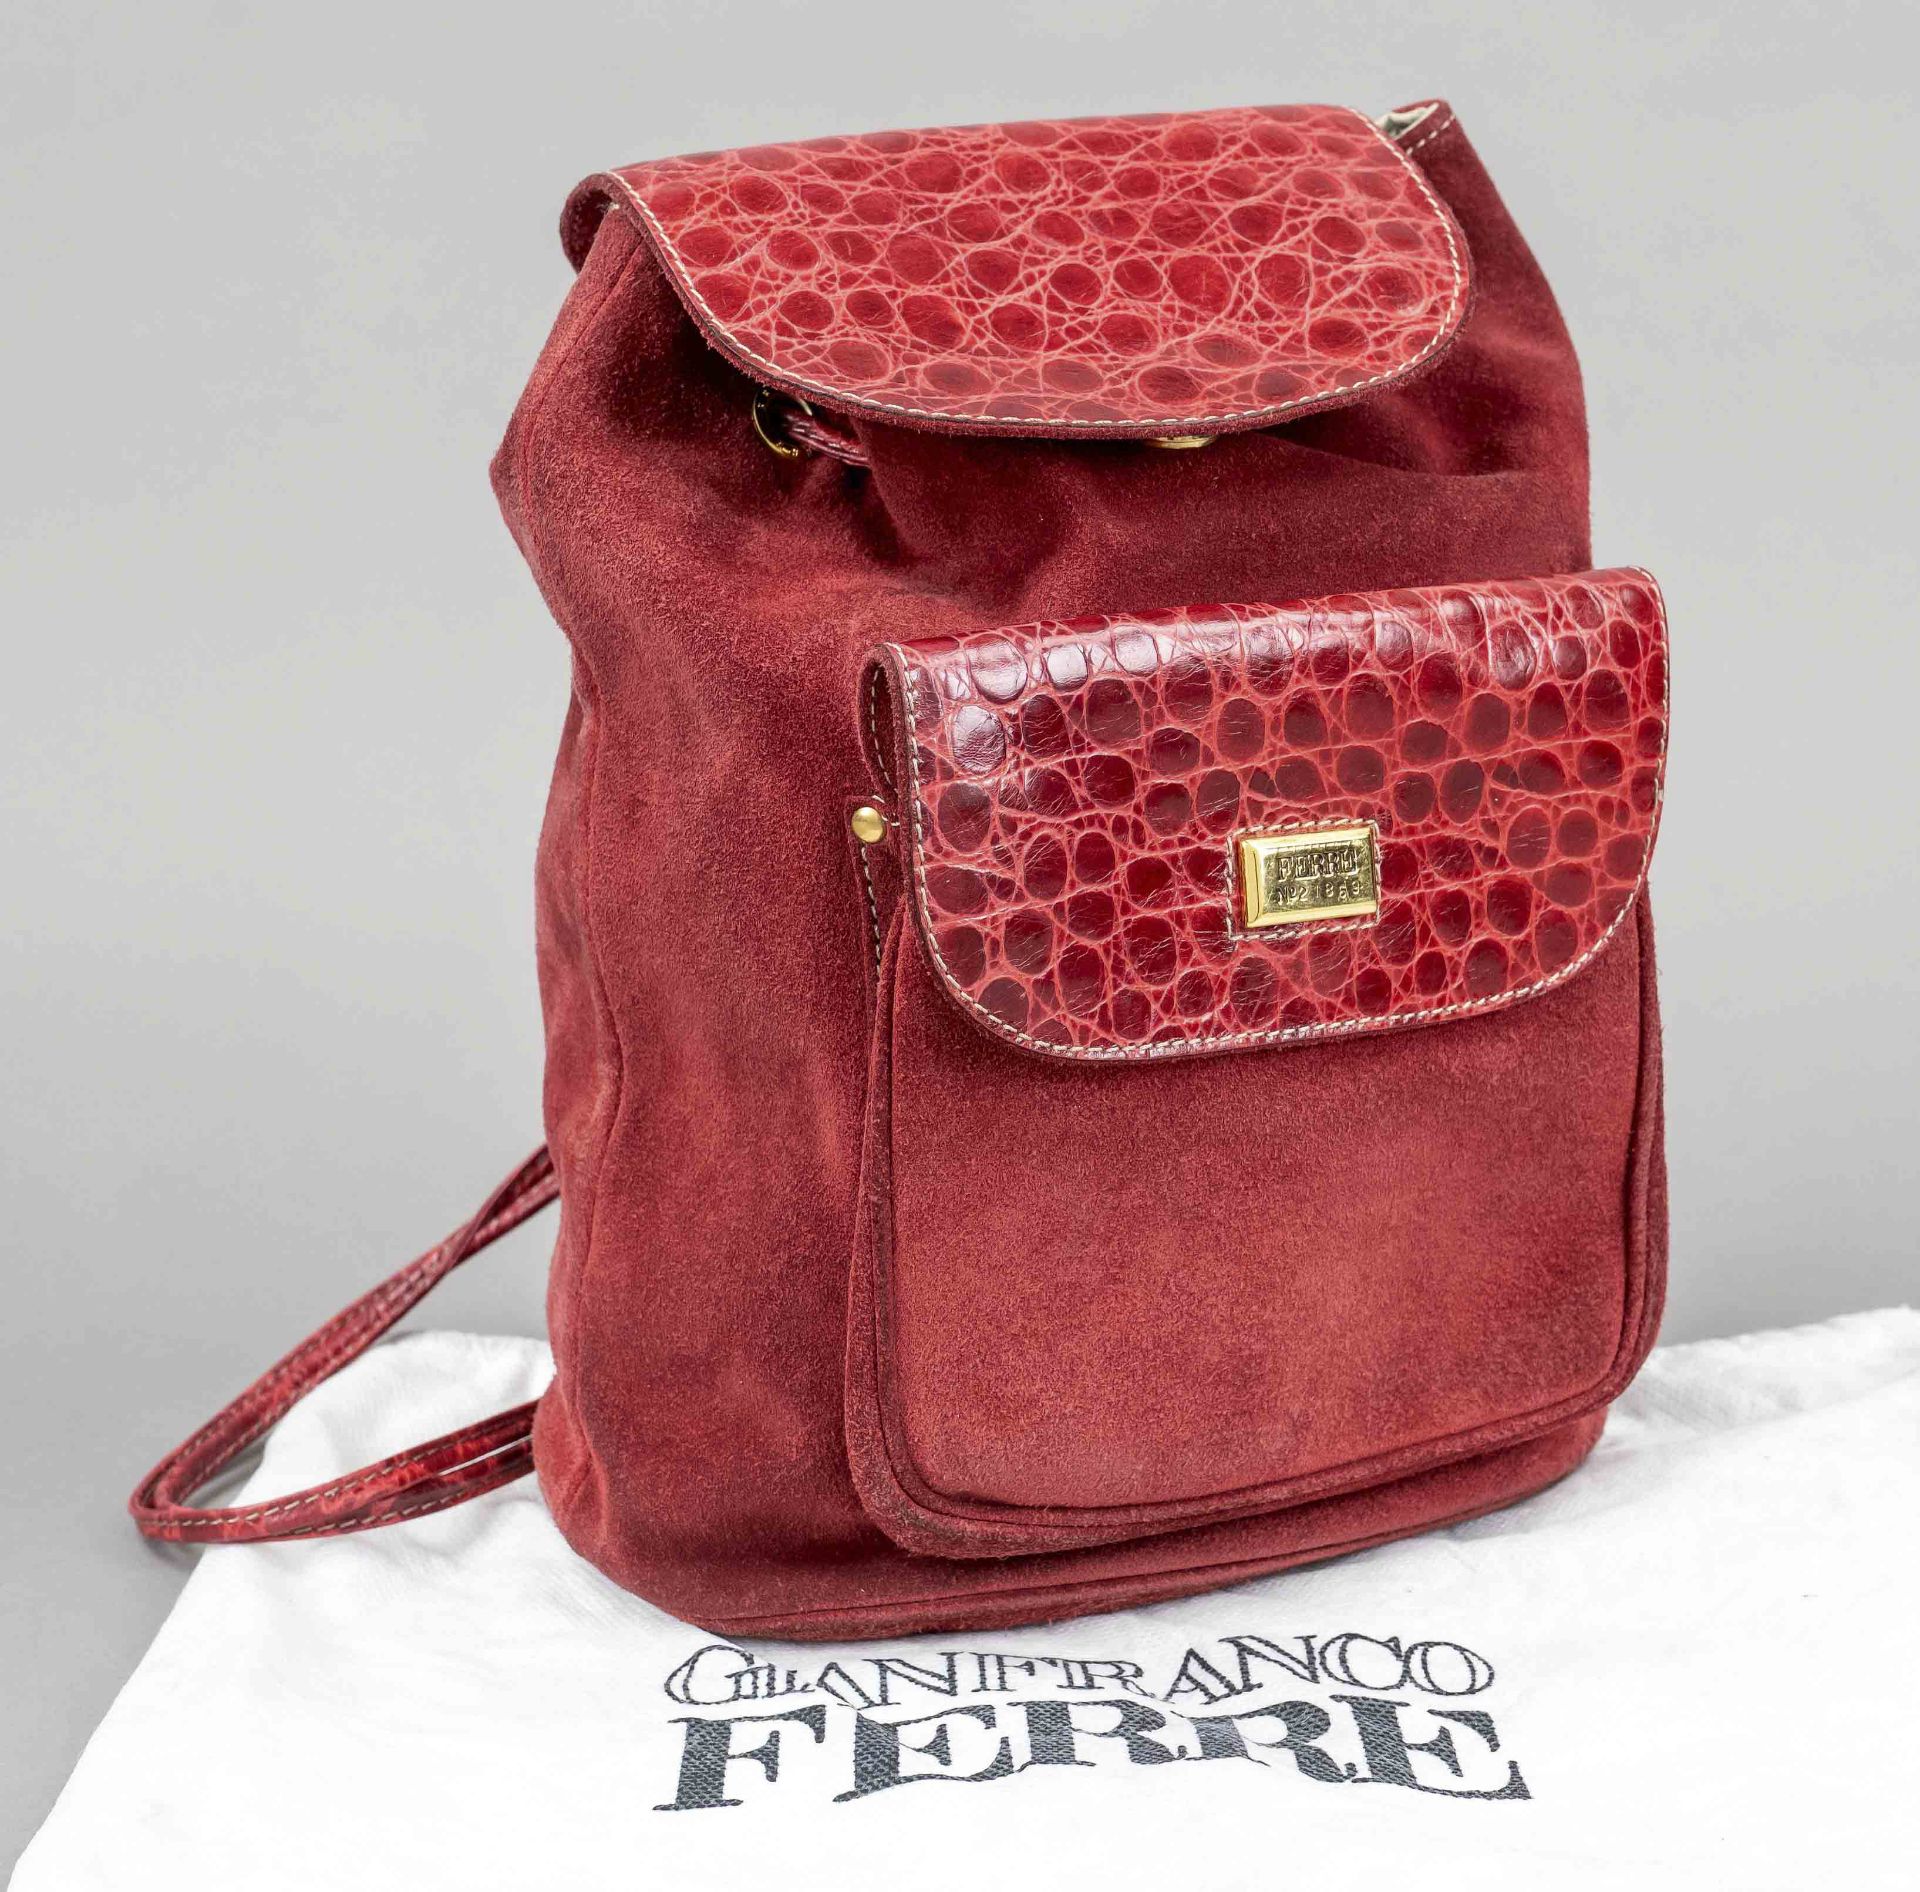 Gianfranco Ferré, small vintage backpack, burgundy suede with details in smooth leather of the